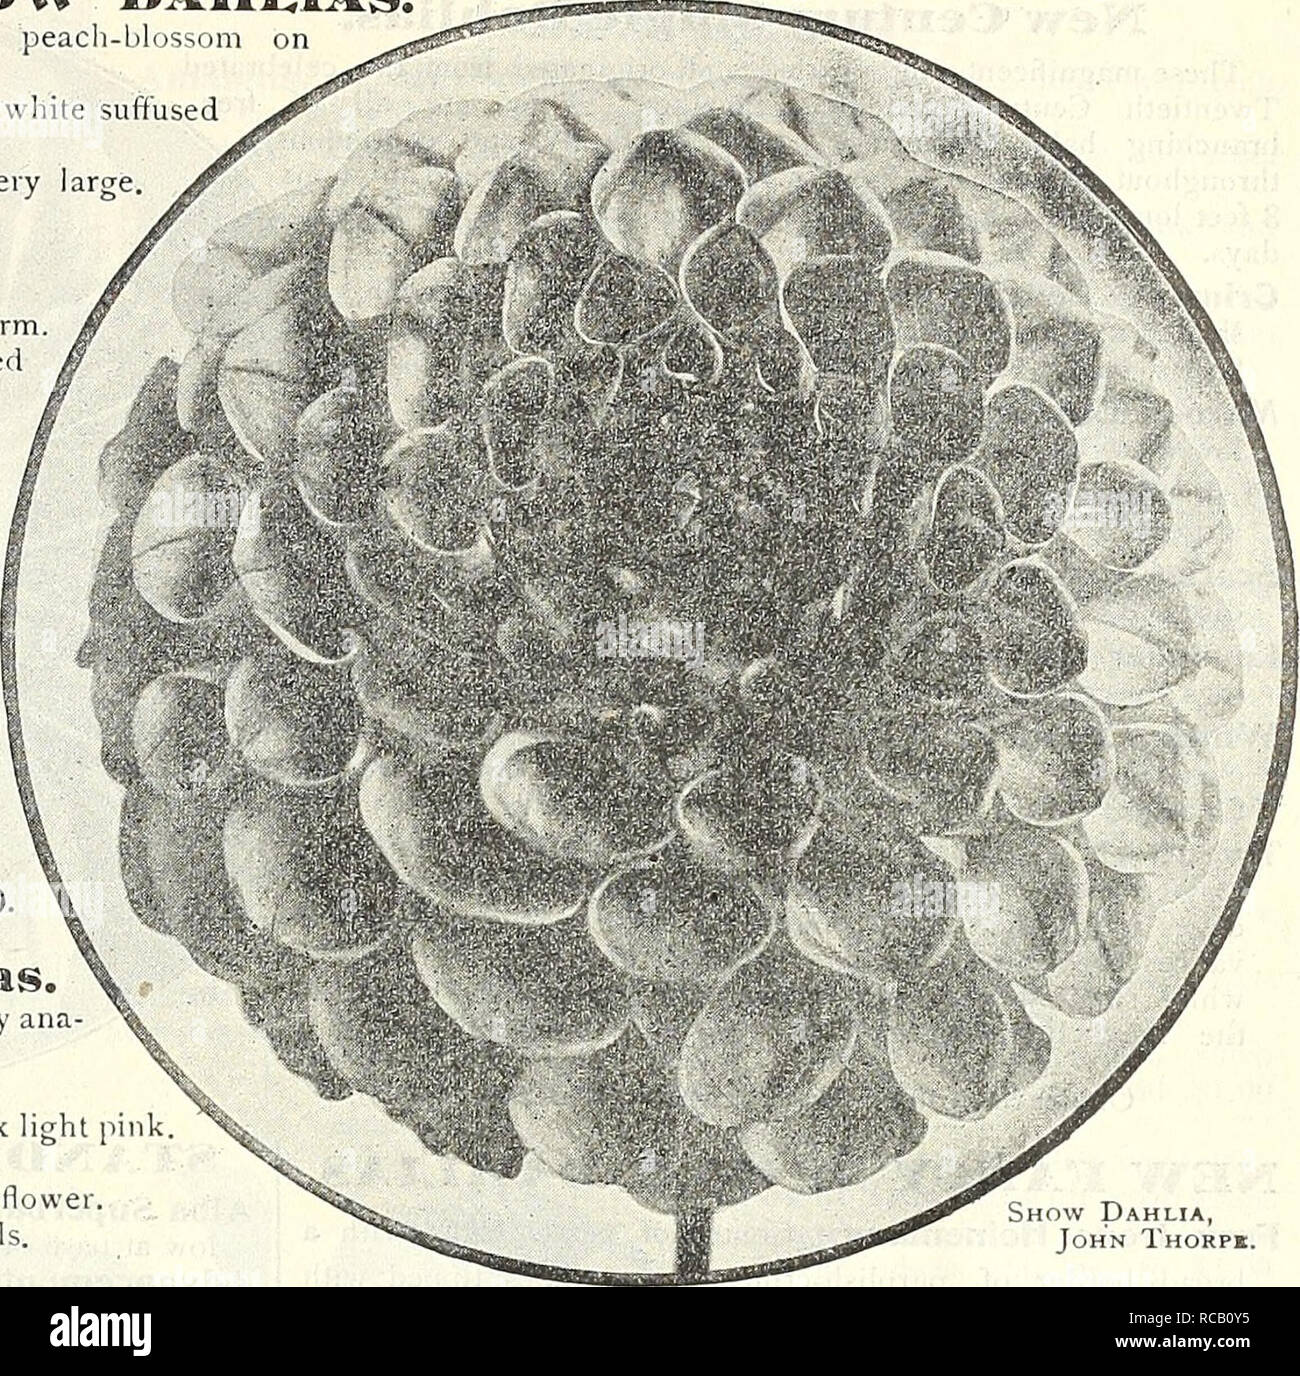 . Dreer's 1838 1908 garden book. Seeds Catalogs; Nursery stock Catalogs; Gardening Equipment and supplies Catalogs; Flowers Seeds Catalogs; Vegetables Seeds Catalogs; Fruit Seeds Catalogs. EER-PHIlADELPtllAfA- ORff tlHOUSE PLW: 145 I^arge-flowering SH01!V DAHI.IAS. Arabella. Liglit sulphm-yellow, shaded peach-blossom on ed;Tes; a fine flower. Duchess of Cambridge. B.nse of petals white suffused pink, heavily-tipped dark crimson. Emily. Solferino, with white markings ; veiy Fanny Purchase. A fine deep yellow. Hero. Analine red ; fine shaped. John Elitch. Rich deep crimson. John Thorpe. Solferin Stock Photo